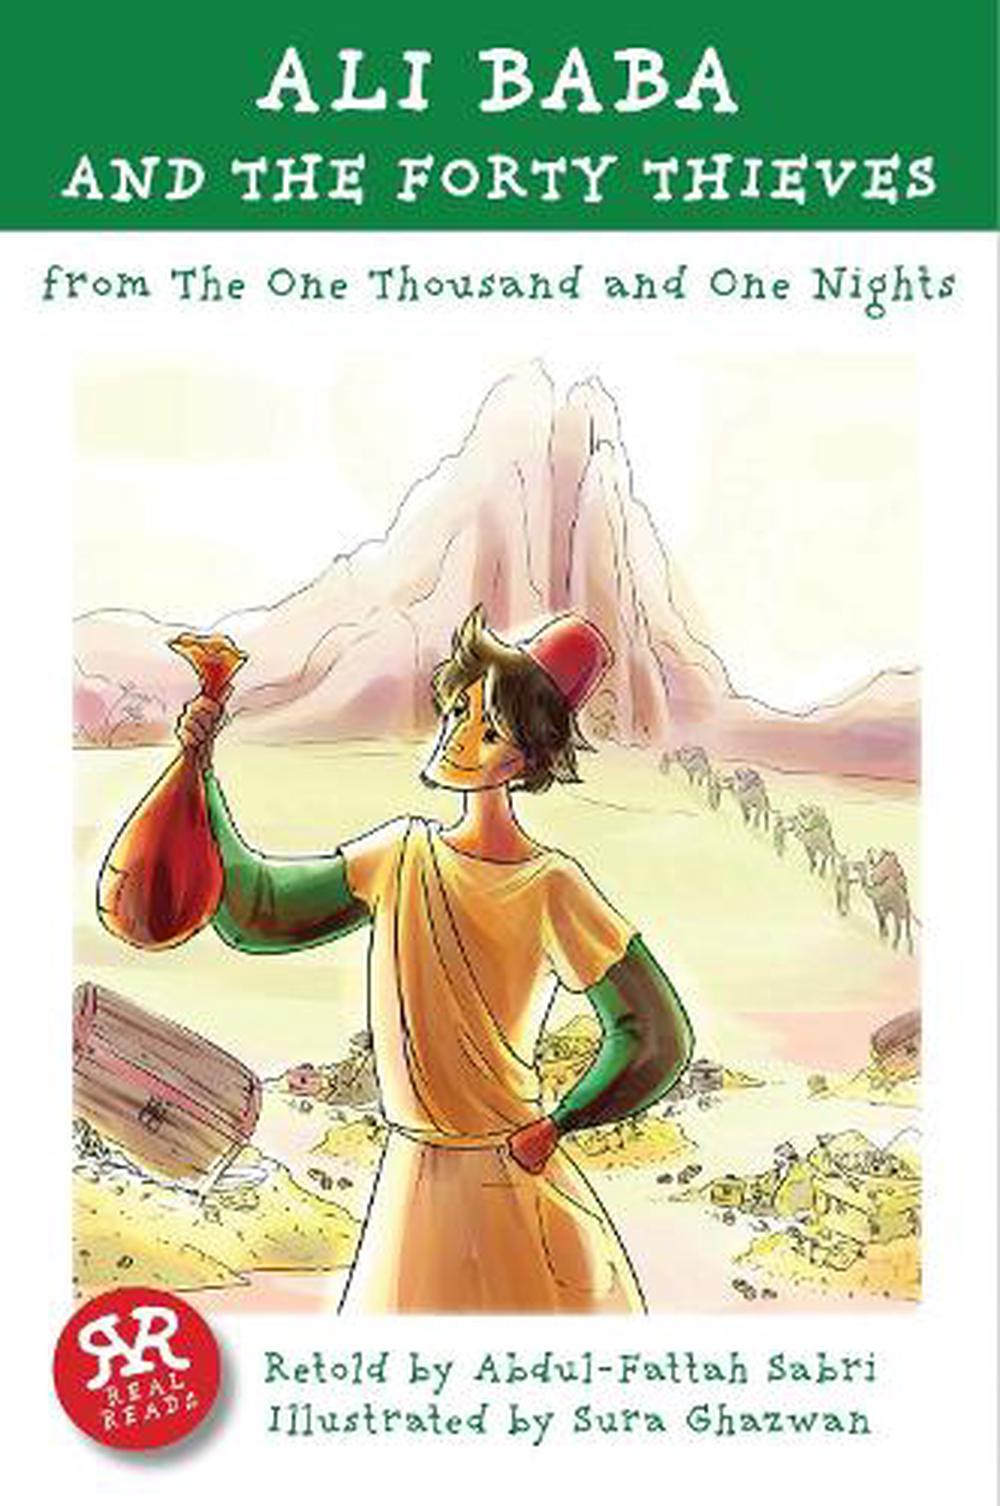 Ali Baba and the Forty Thieves: From the One Thousand and One Nights by